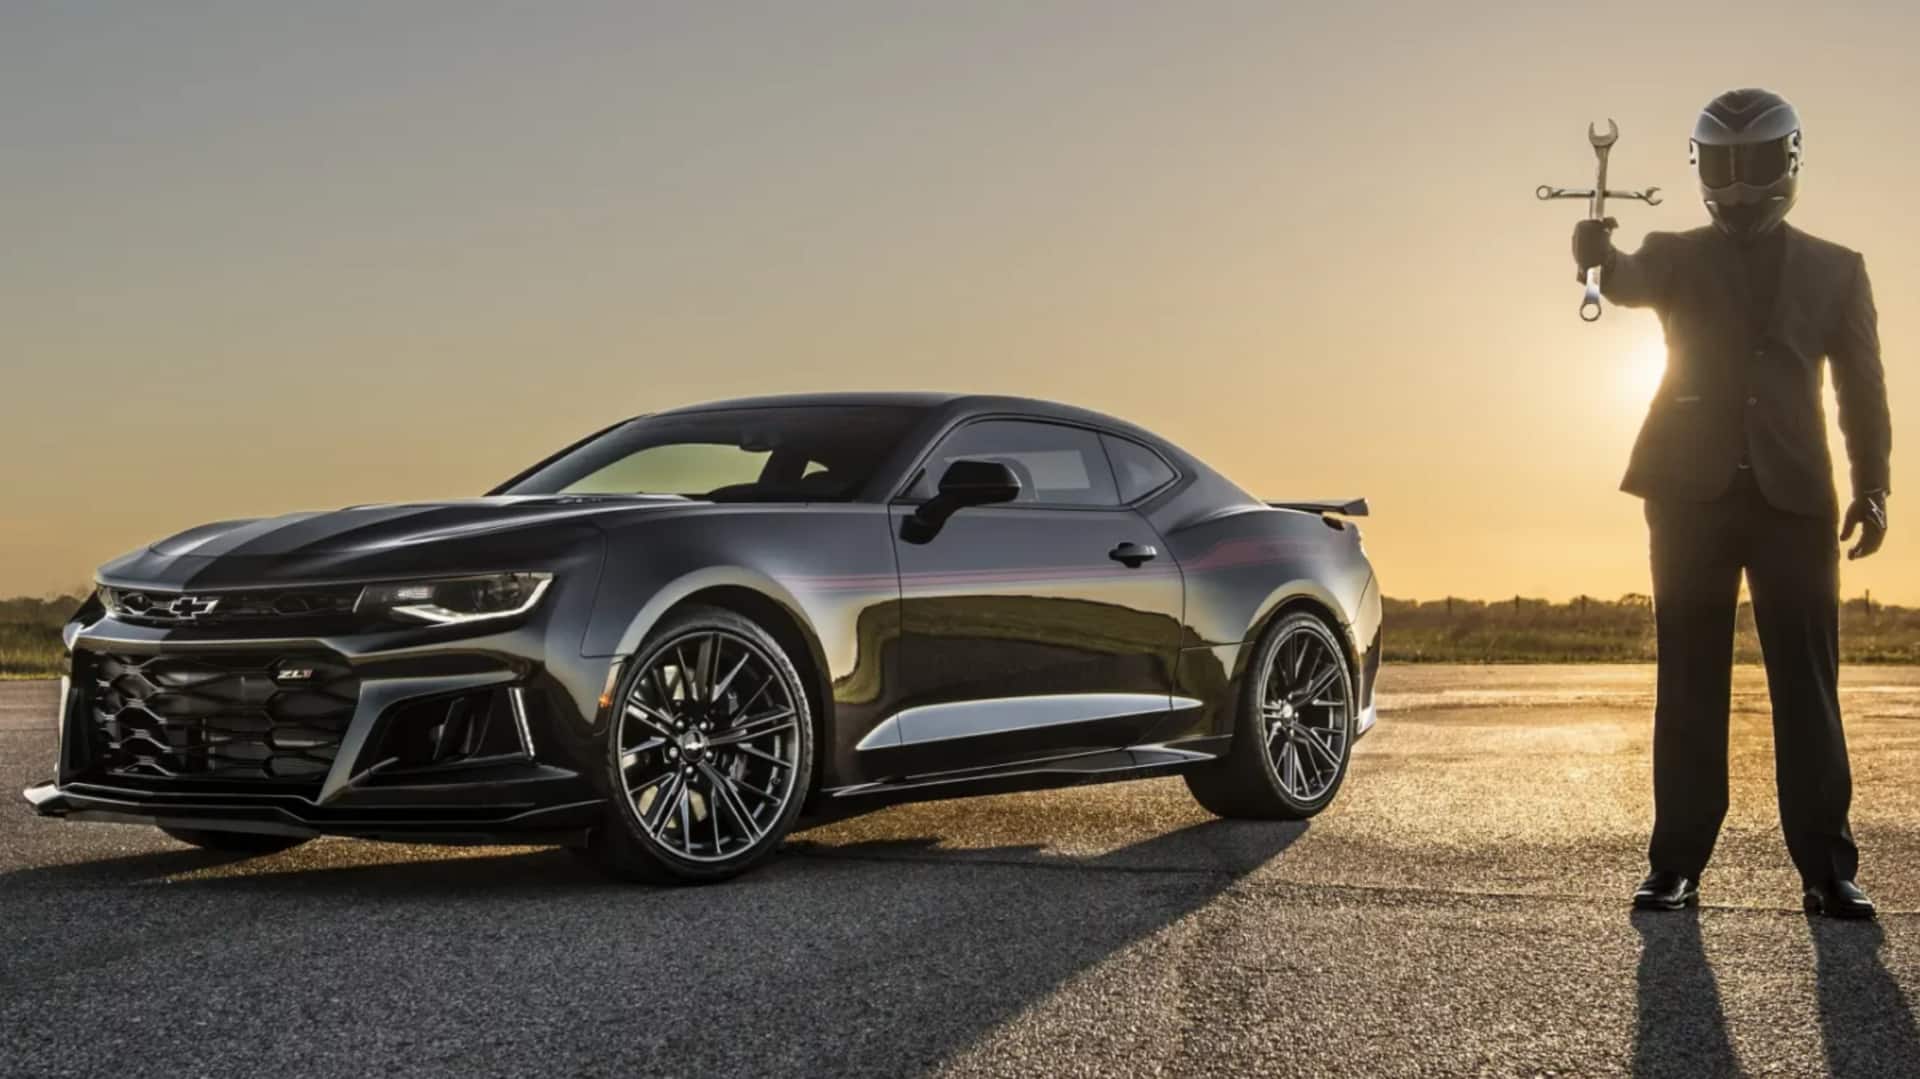 Hennessey pays tribute to Camaro with limited-run Exorcist Final Edition